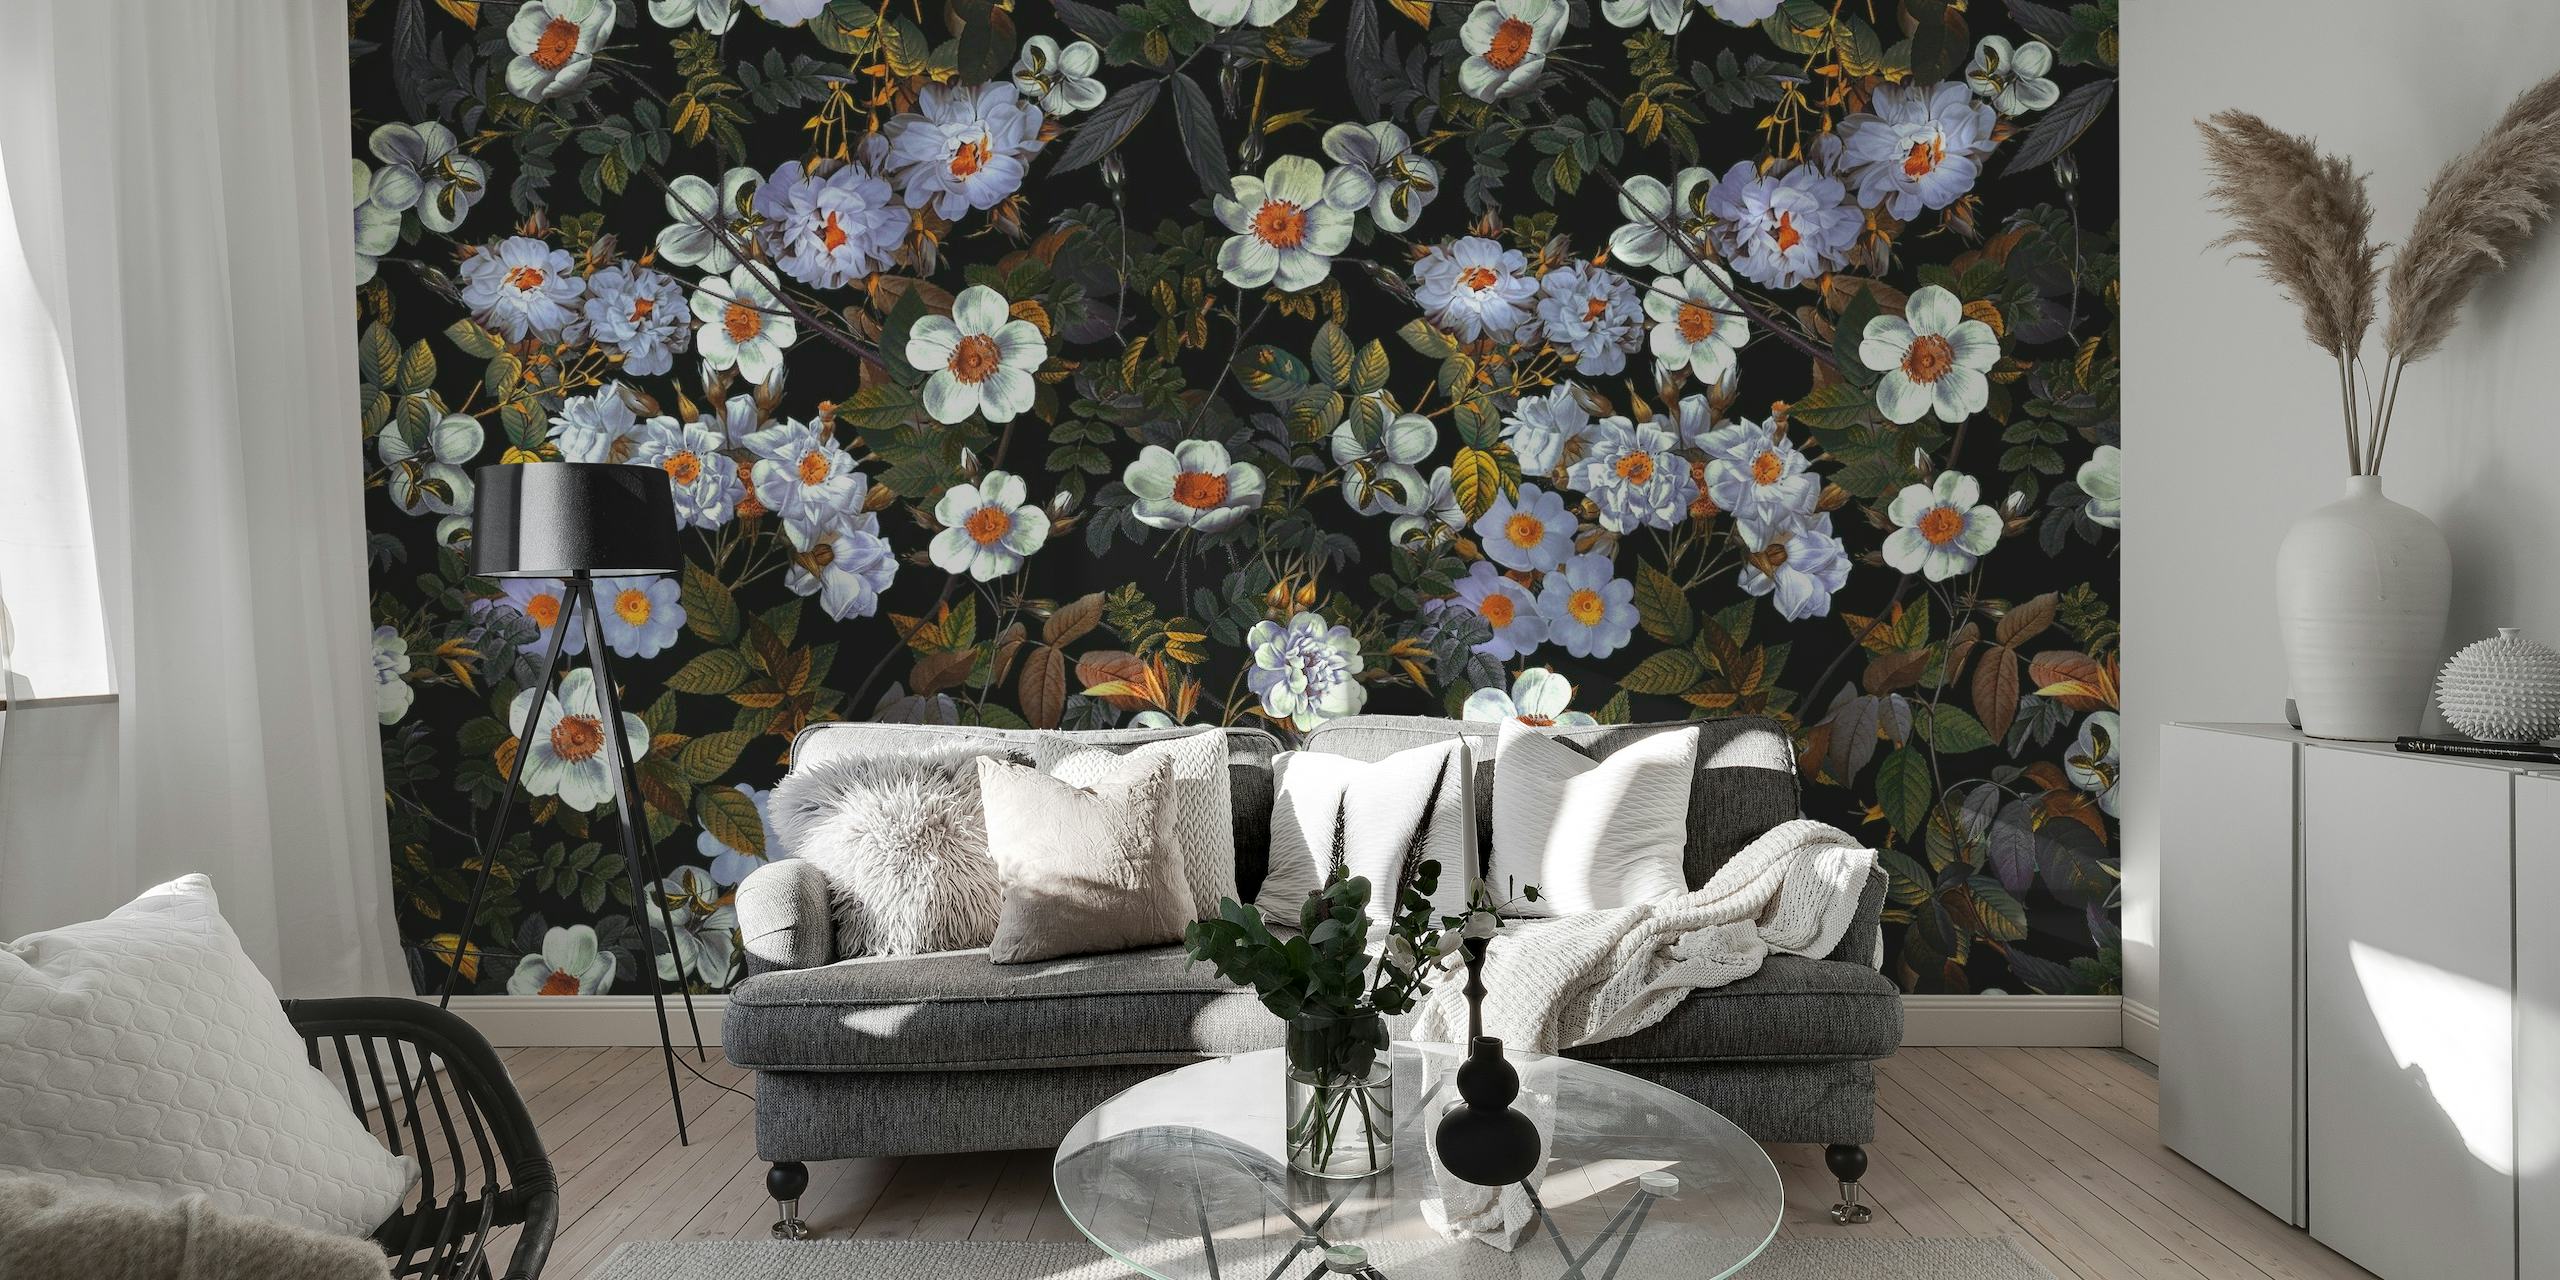 Dark floral pattern wall mural with blooming flowers on Happywall